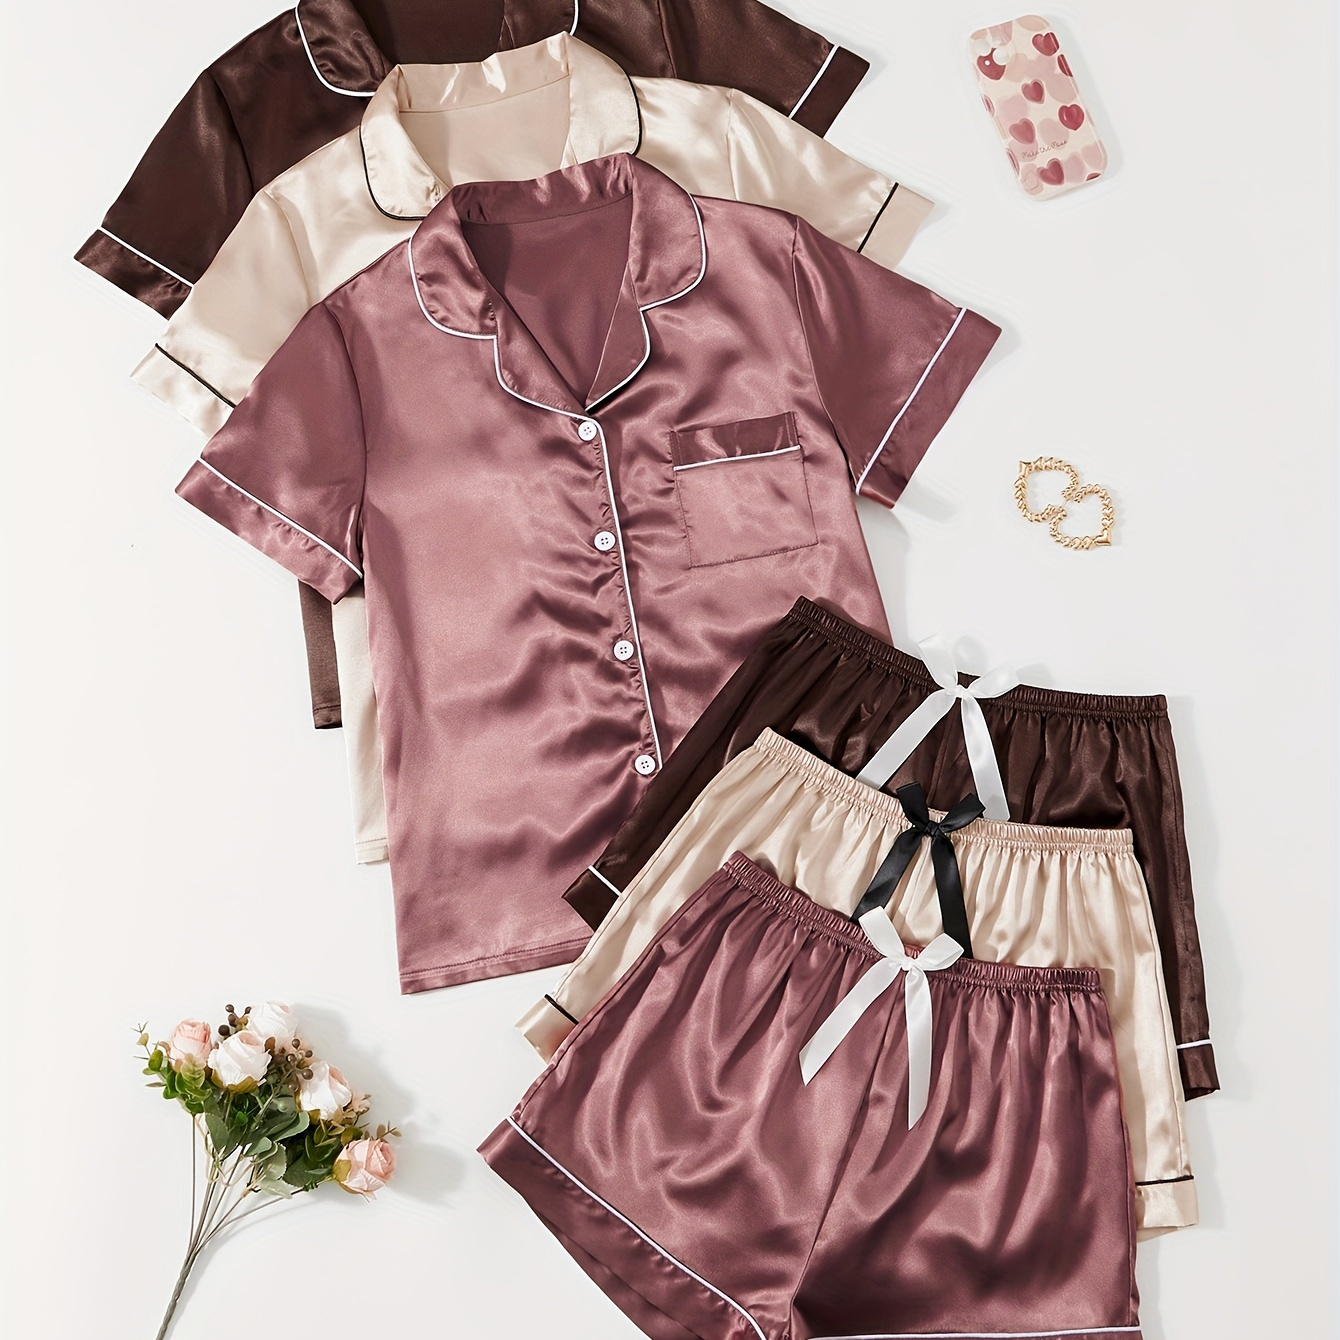 

3 Sets Women's Casual Solid Satin Pajama Set, Short Sleeve Buttons Lapel Top & Shorts, Comfortable Relaxed Fit, Summer Nightwear